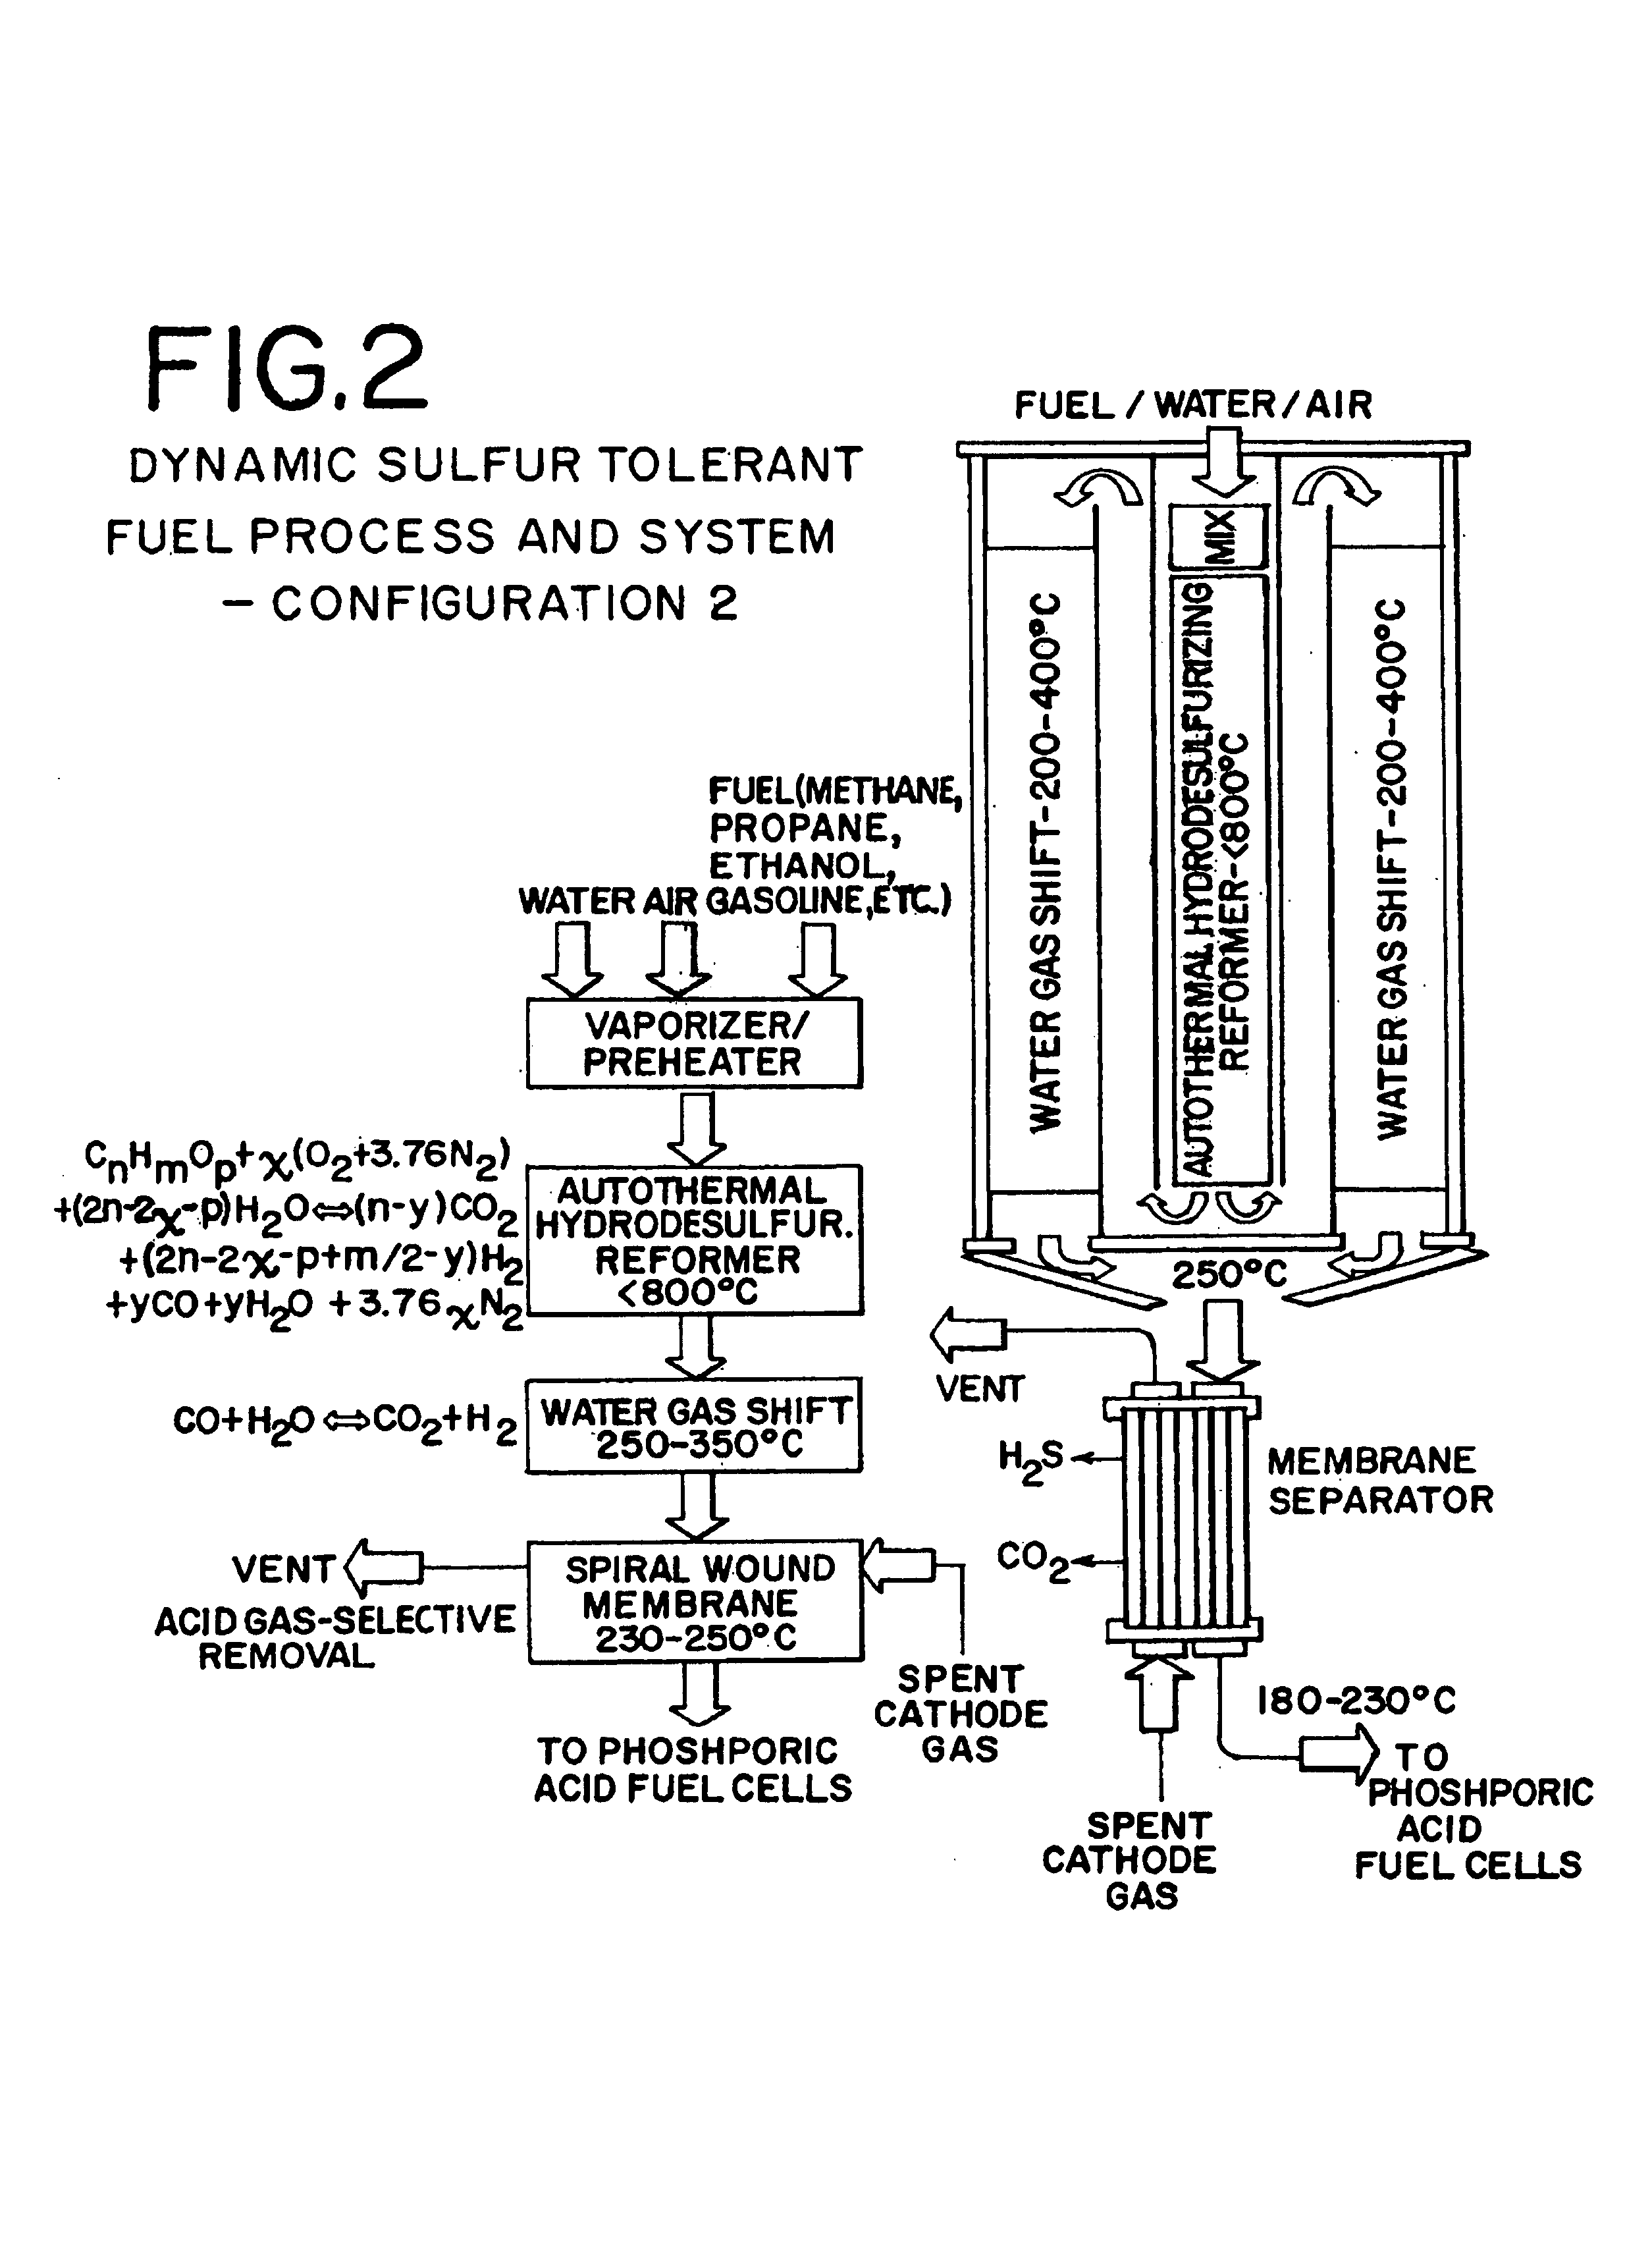 Dynamic sulfur tolerant process and system with inline acid gas-selective removal for generating hydrogen for fuel cells